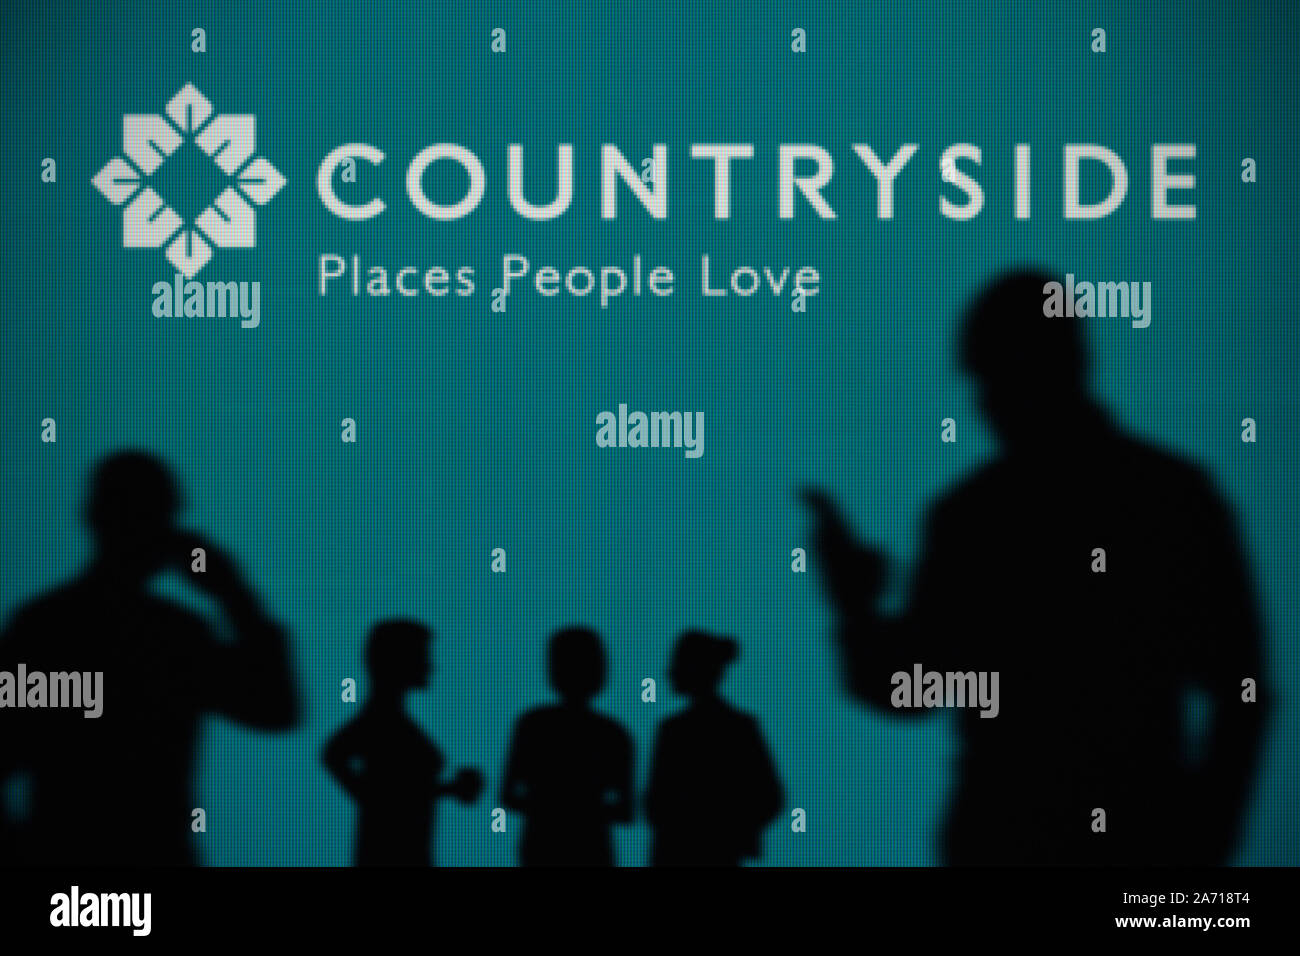 The Countryside Properties logo is seen on an LED screen in the background while a silhouetted person uses a smartphone (Editorial use only) Stock Photo